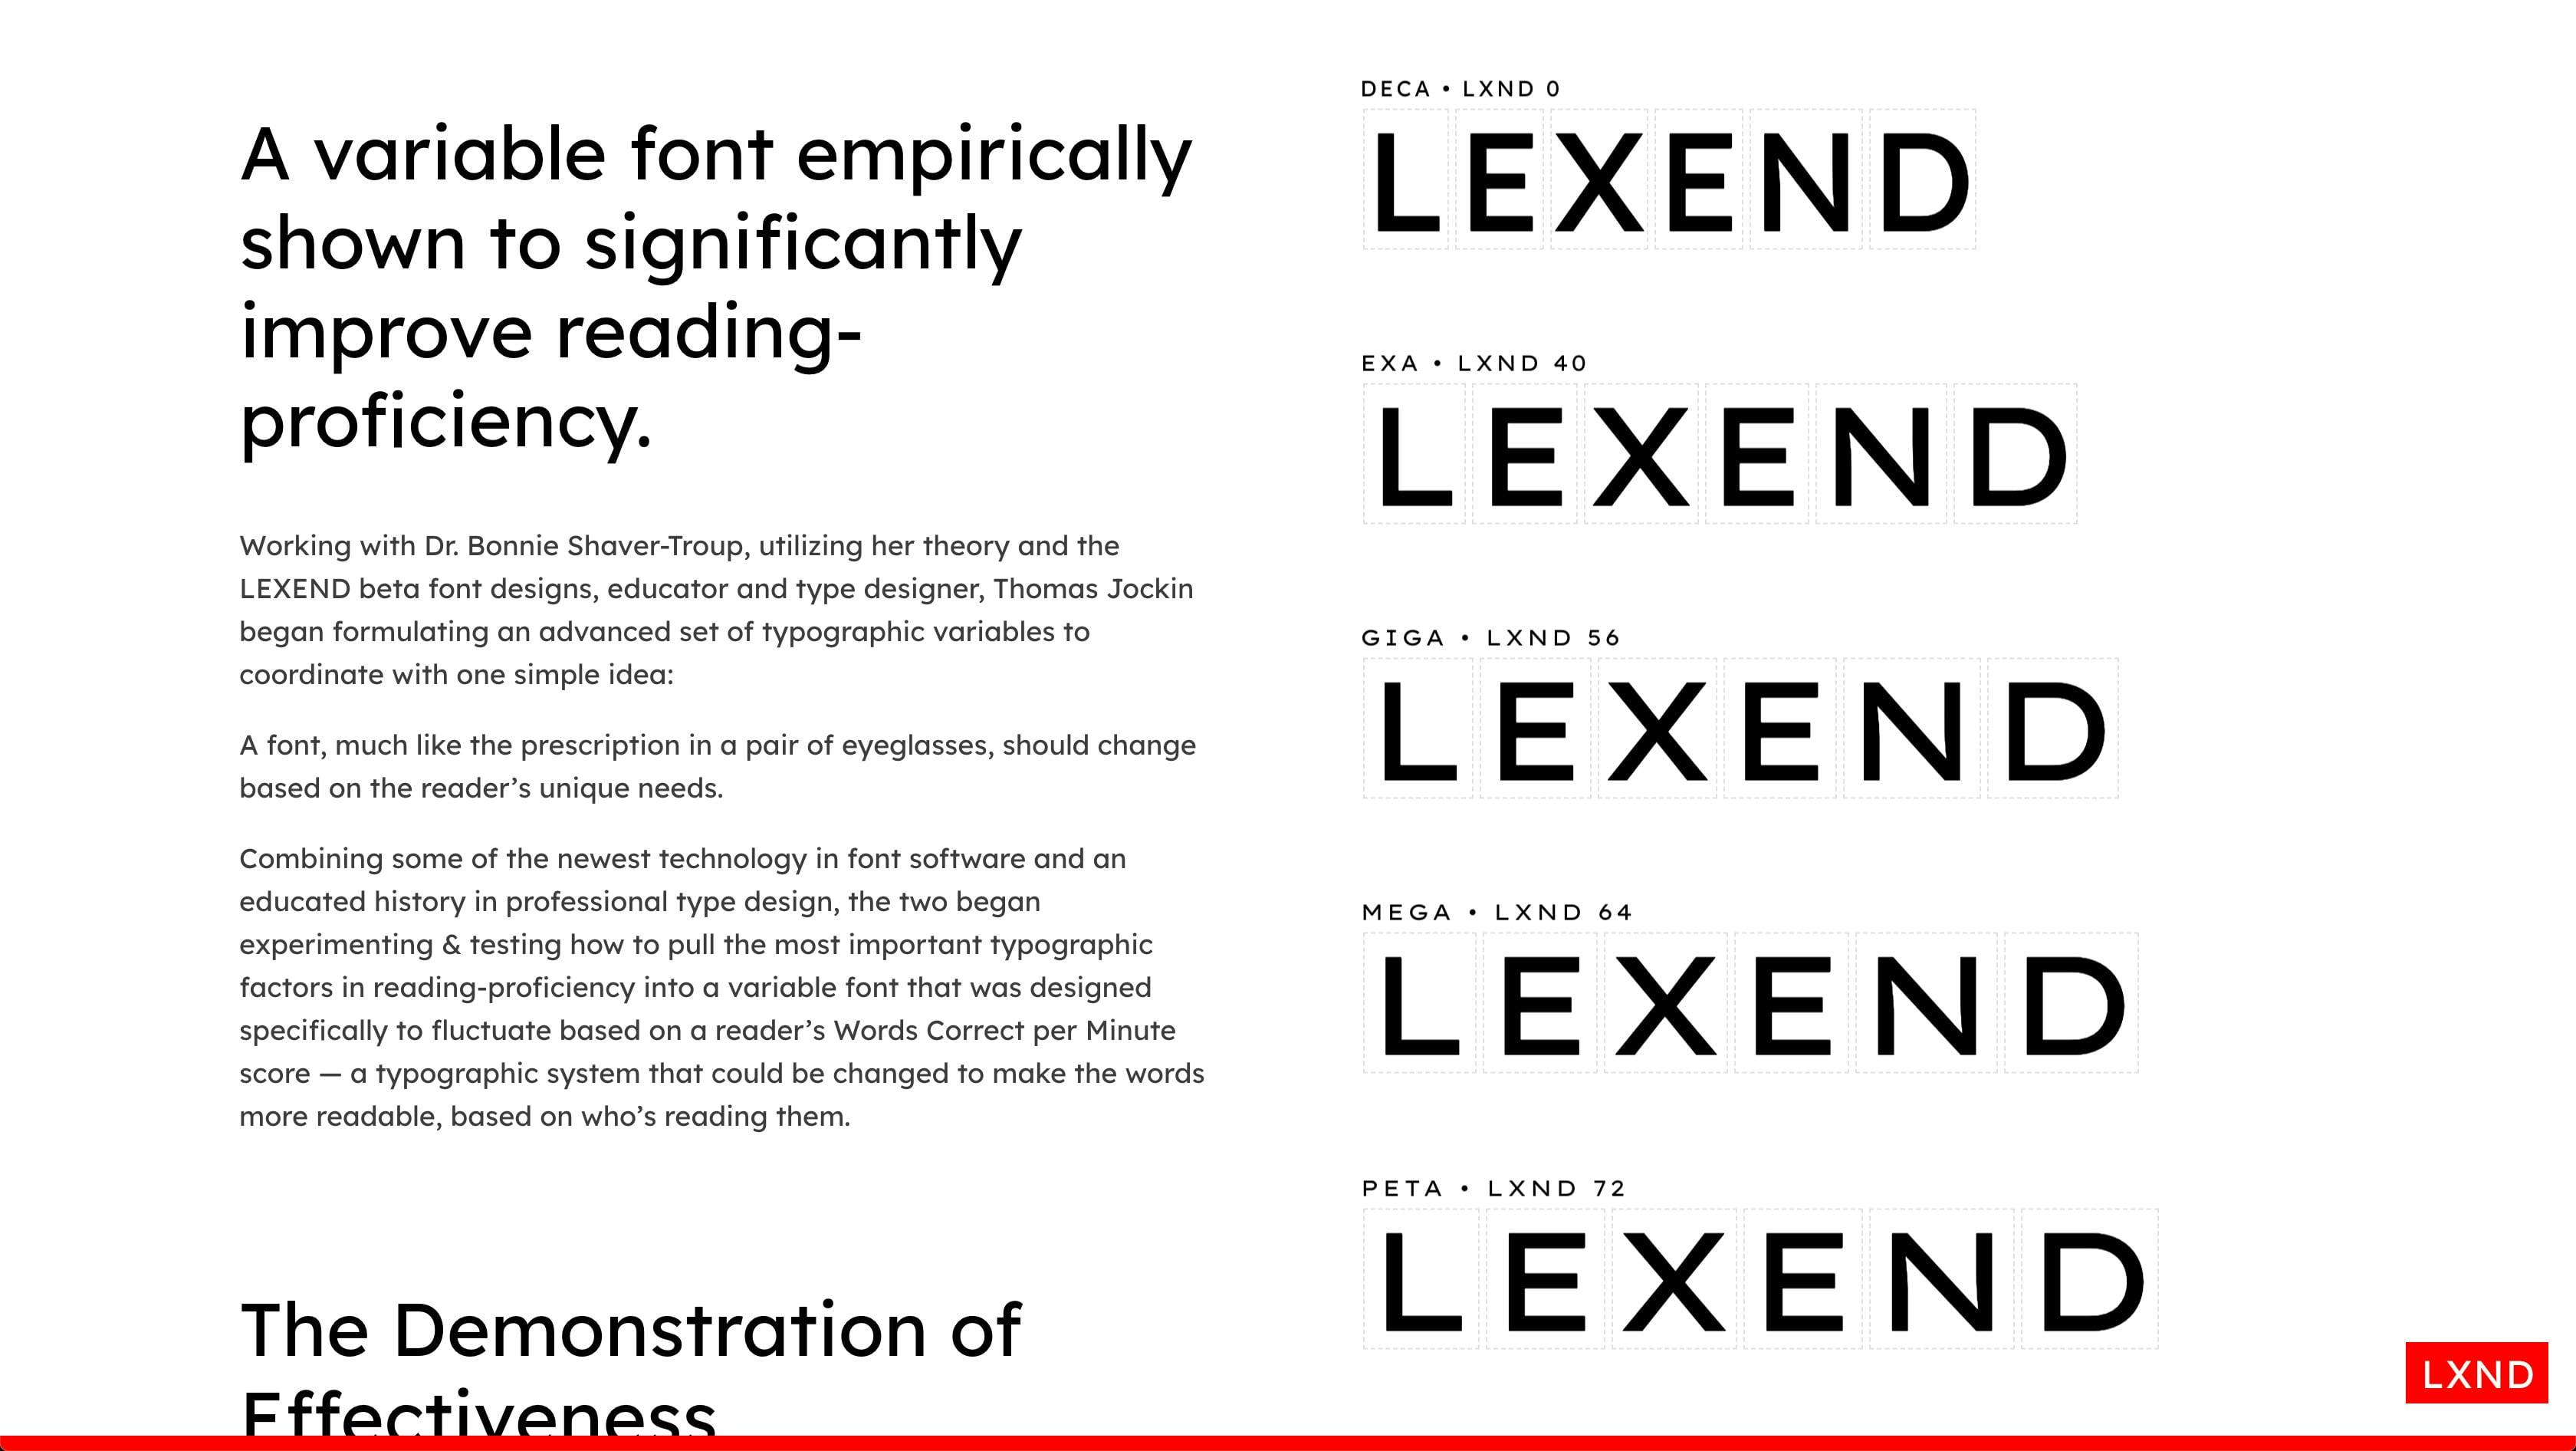 Lexend Fonts, a project funded by Google to make a variable font that's customized to your reading ability, hired me to design & develop their identity and website.